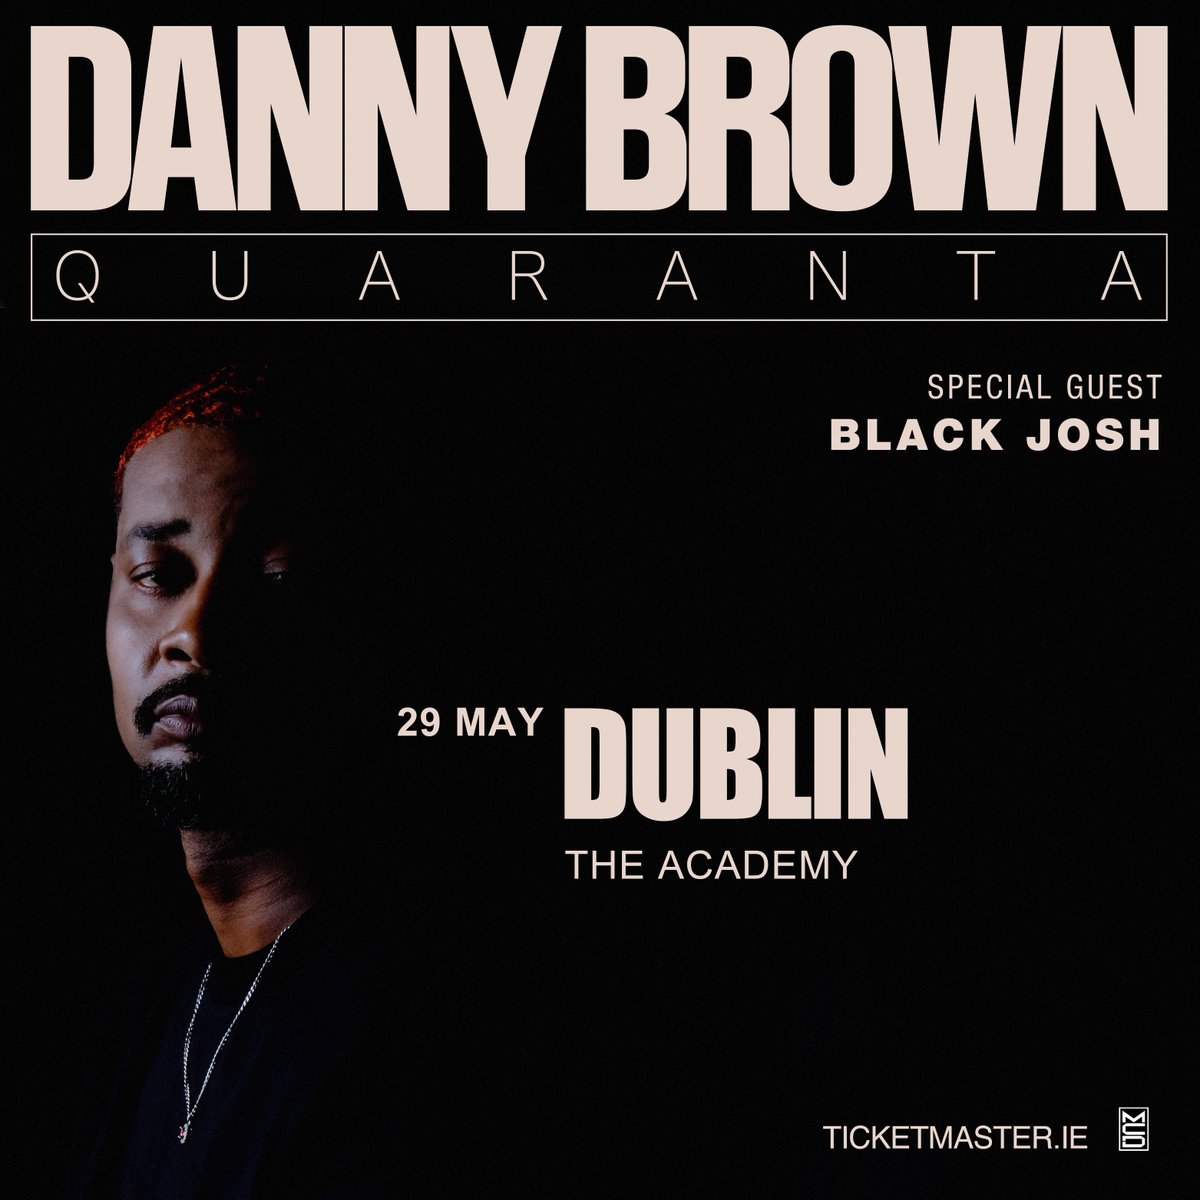 𝙎𝙐𝙋𝙋𝙊𝙍𝙏 𝘼𝘿𝘿𝙀𝘿⚡️ BLACK JOSH has been added as a special guest to join @xdannyxbrownx for his headline Dublin show at The Academy on May 29th! FINAL TICKETS 🎫 bit.ly/DannyBrown-TM